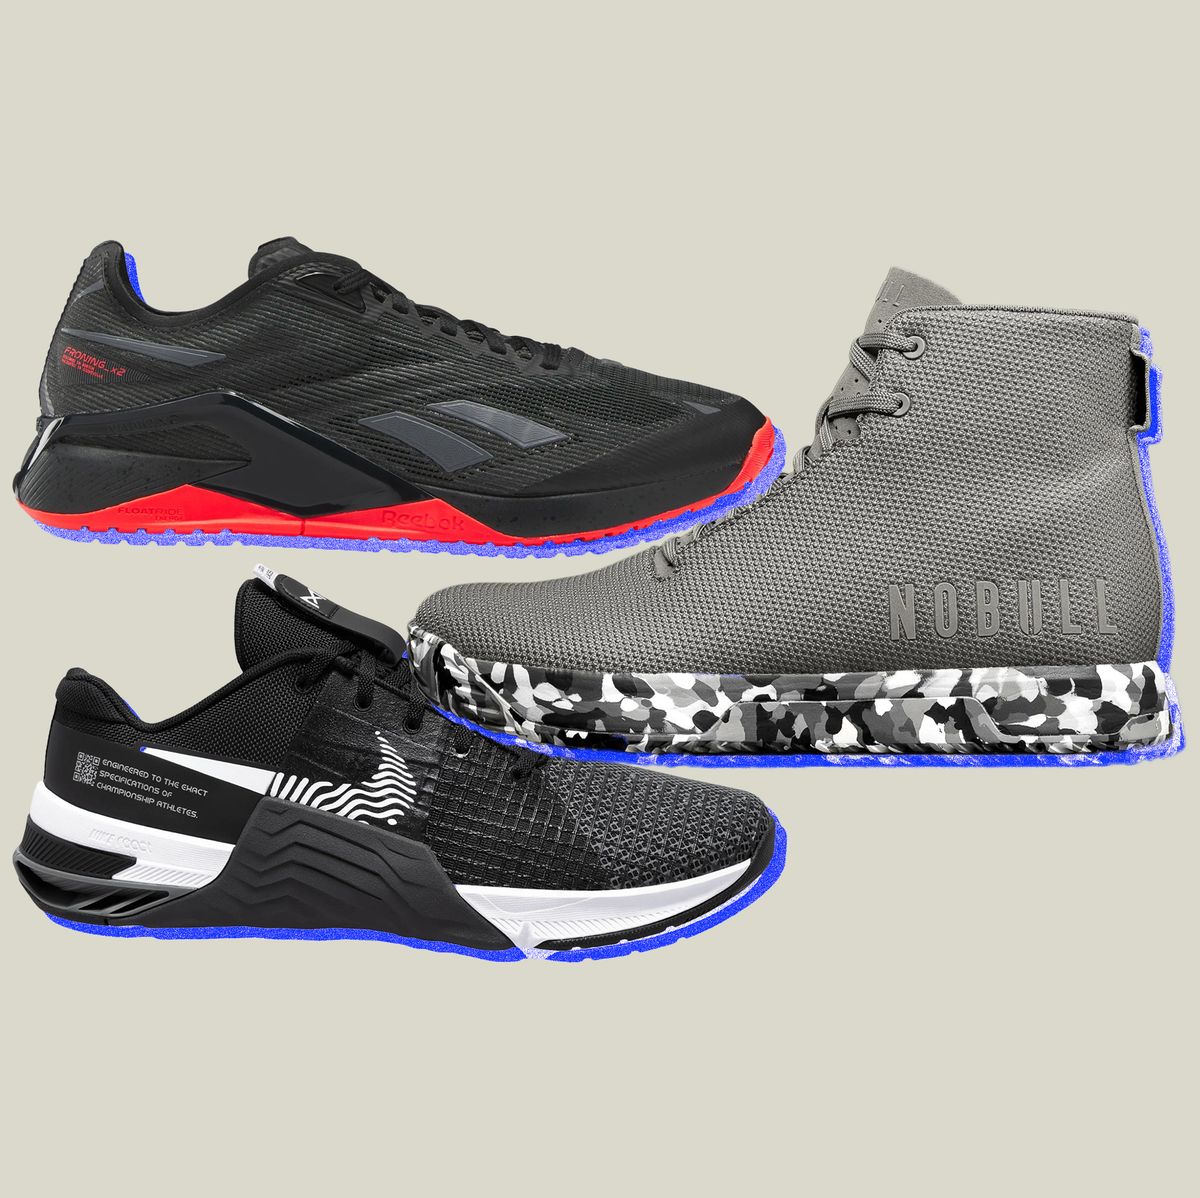 The Best Gym Shoes for Men for Every Type of Workout